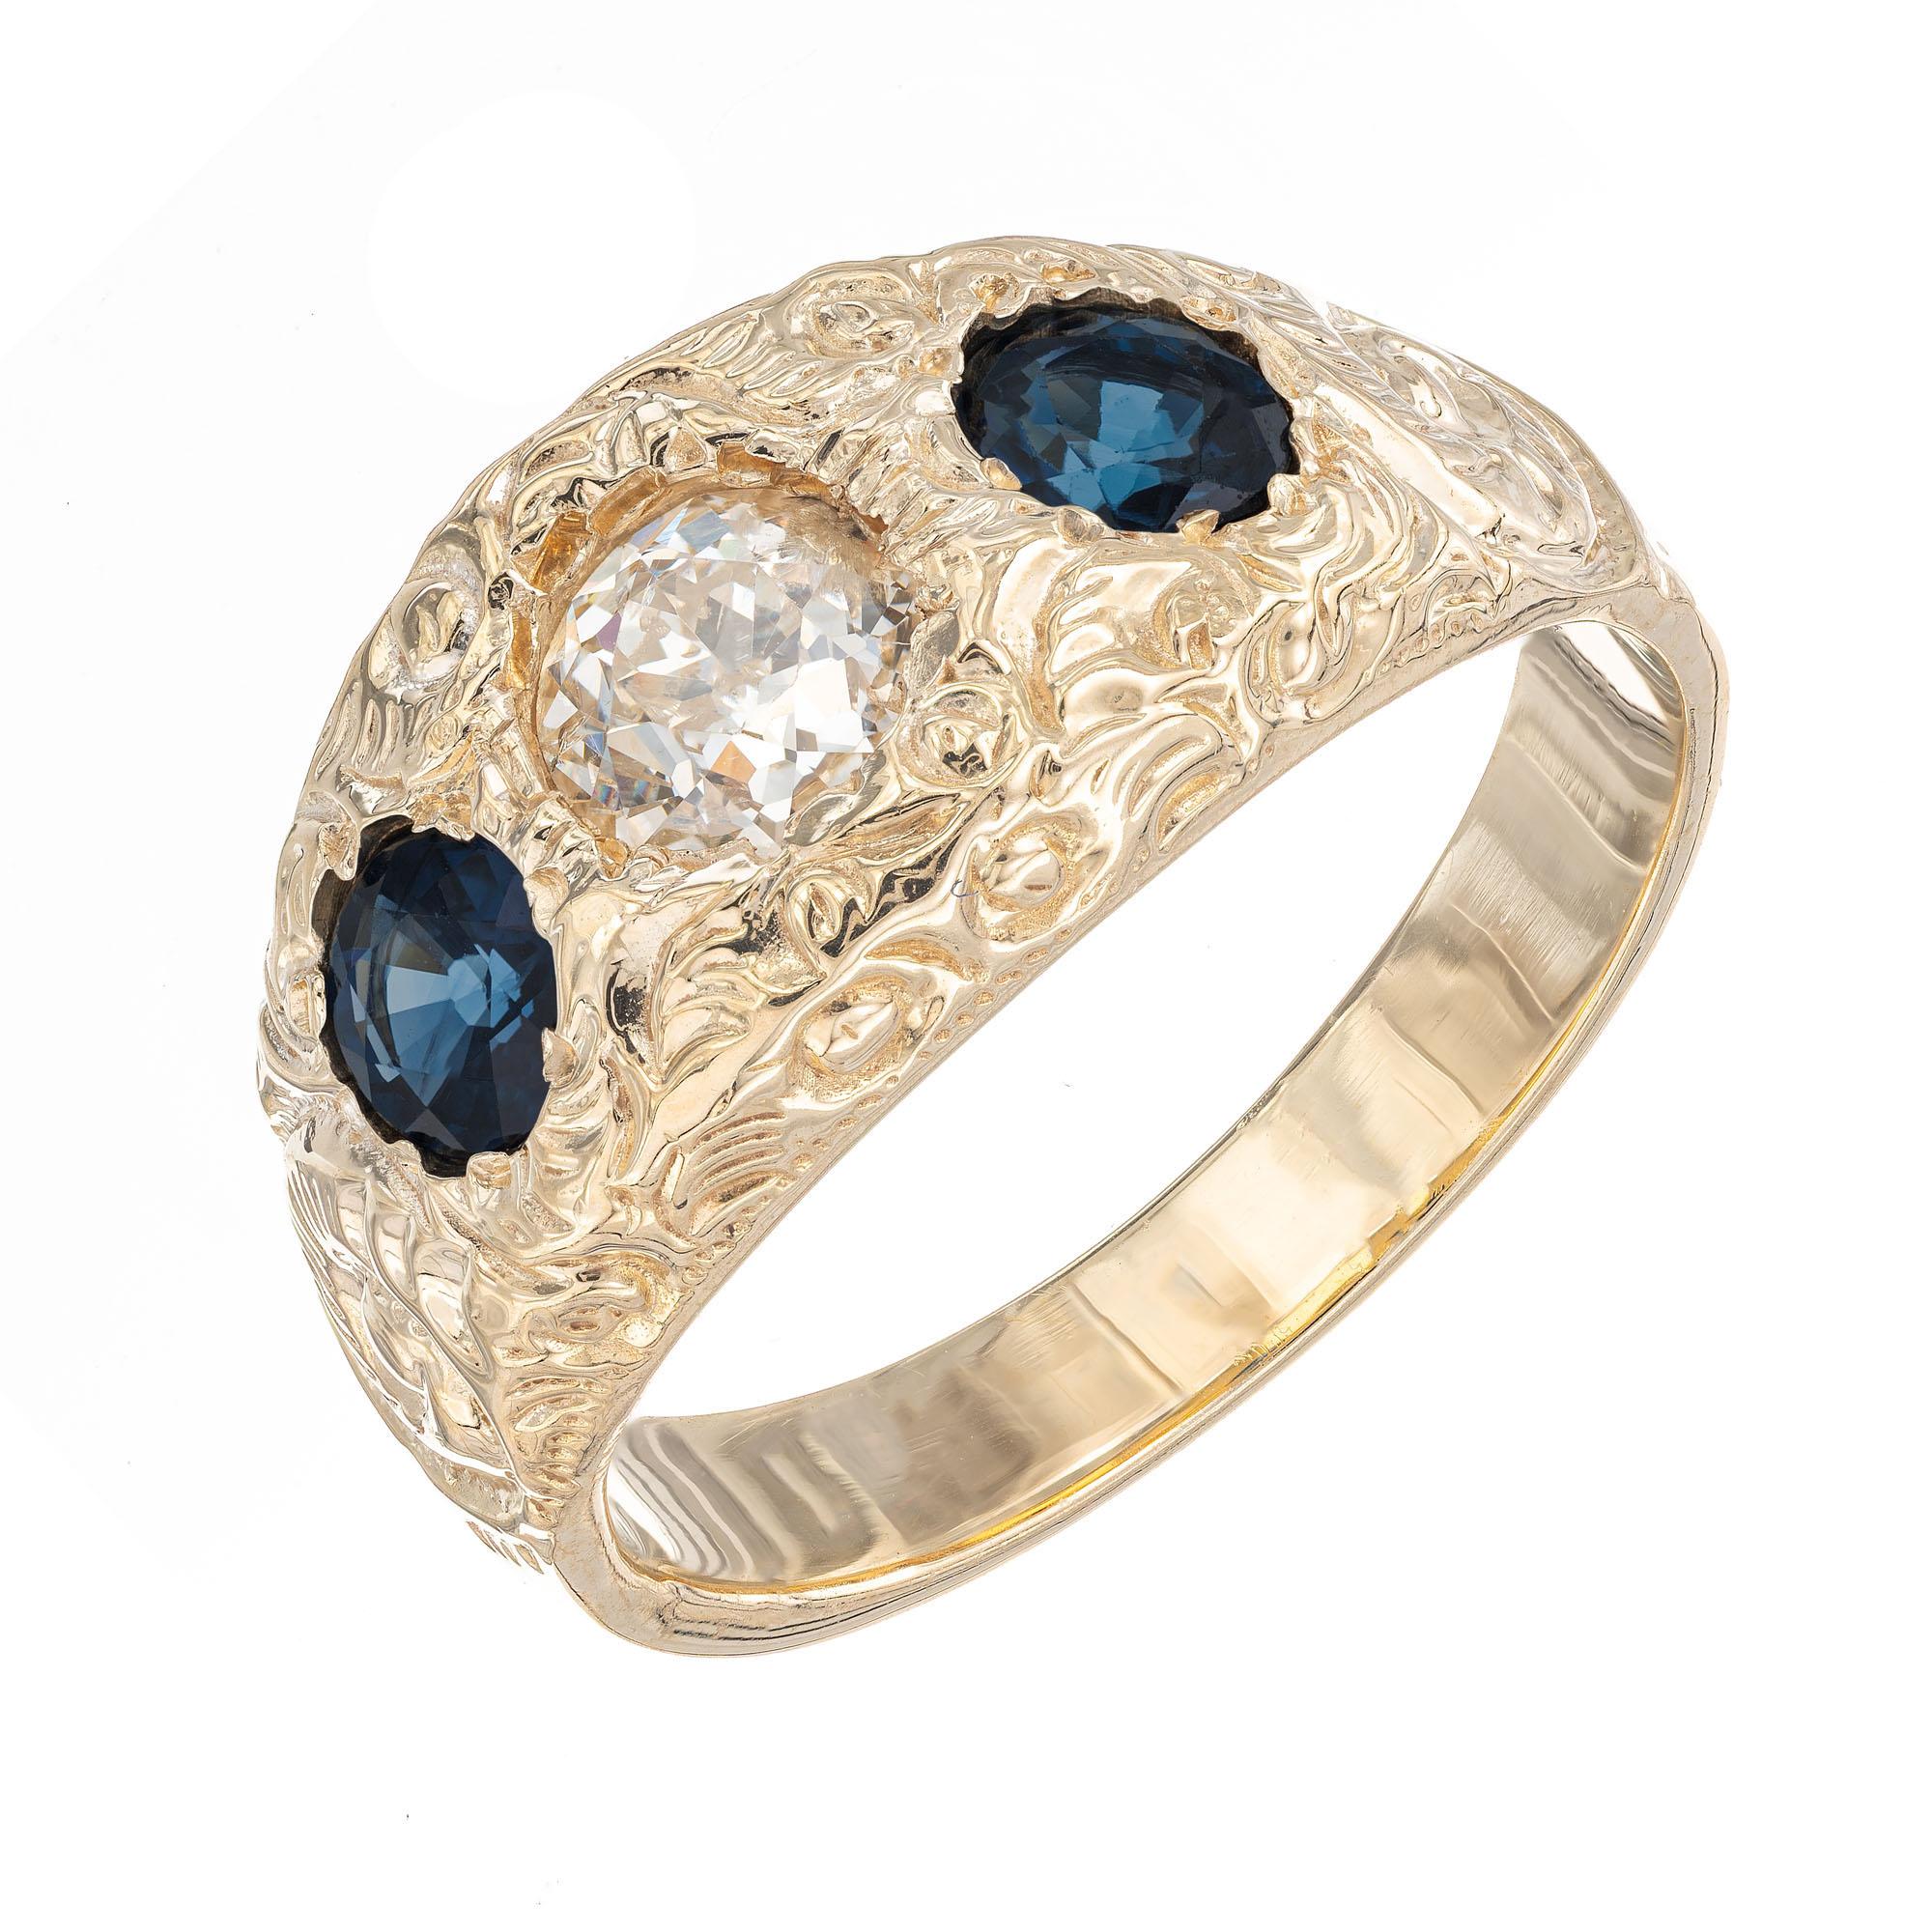 Diamond and sapphire ring. Old European cut center diamond with two round blue accent sapphires. Handmade and hand engraved 14k yellow gold.  Circa 1900

1 old European cut diamond, H-I I approx. .50cts EGL Certificate # 4001422244D
2 round blue